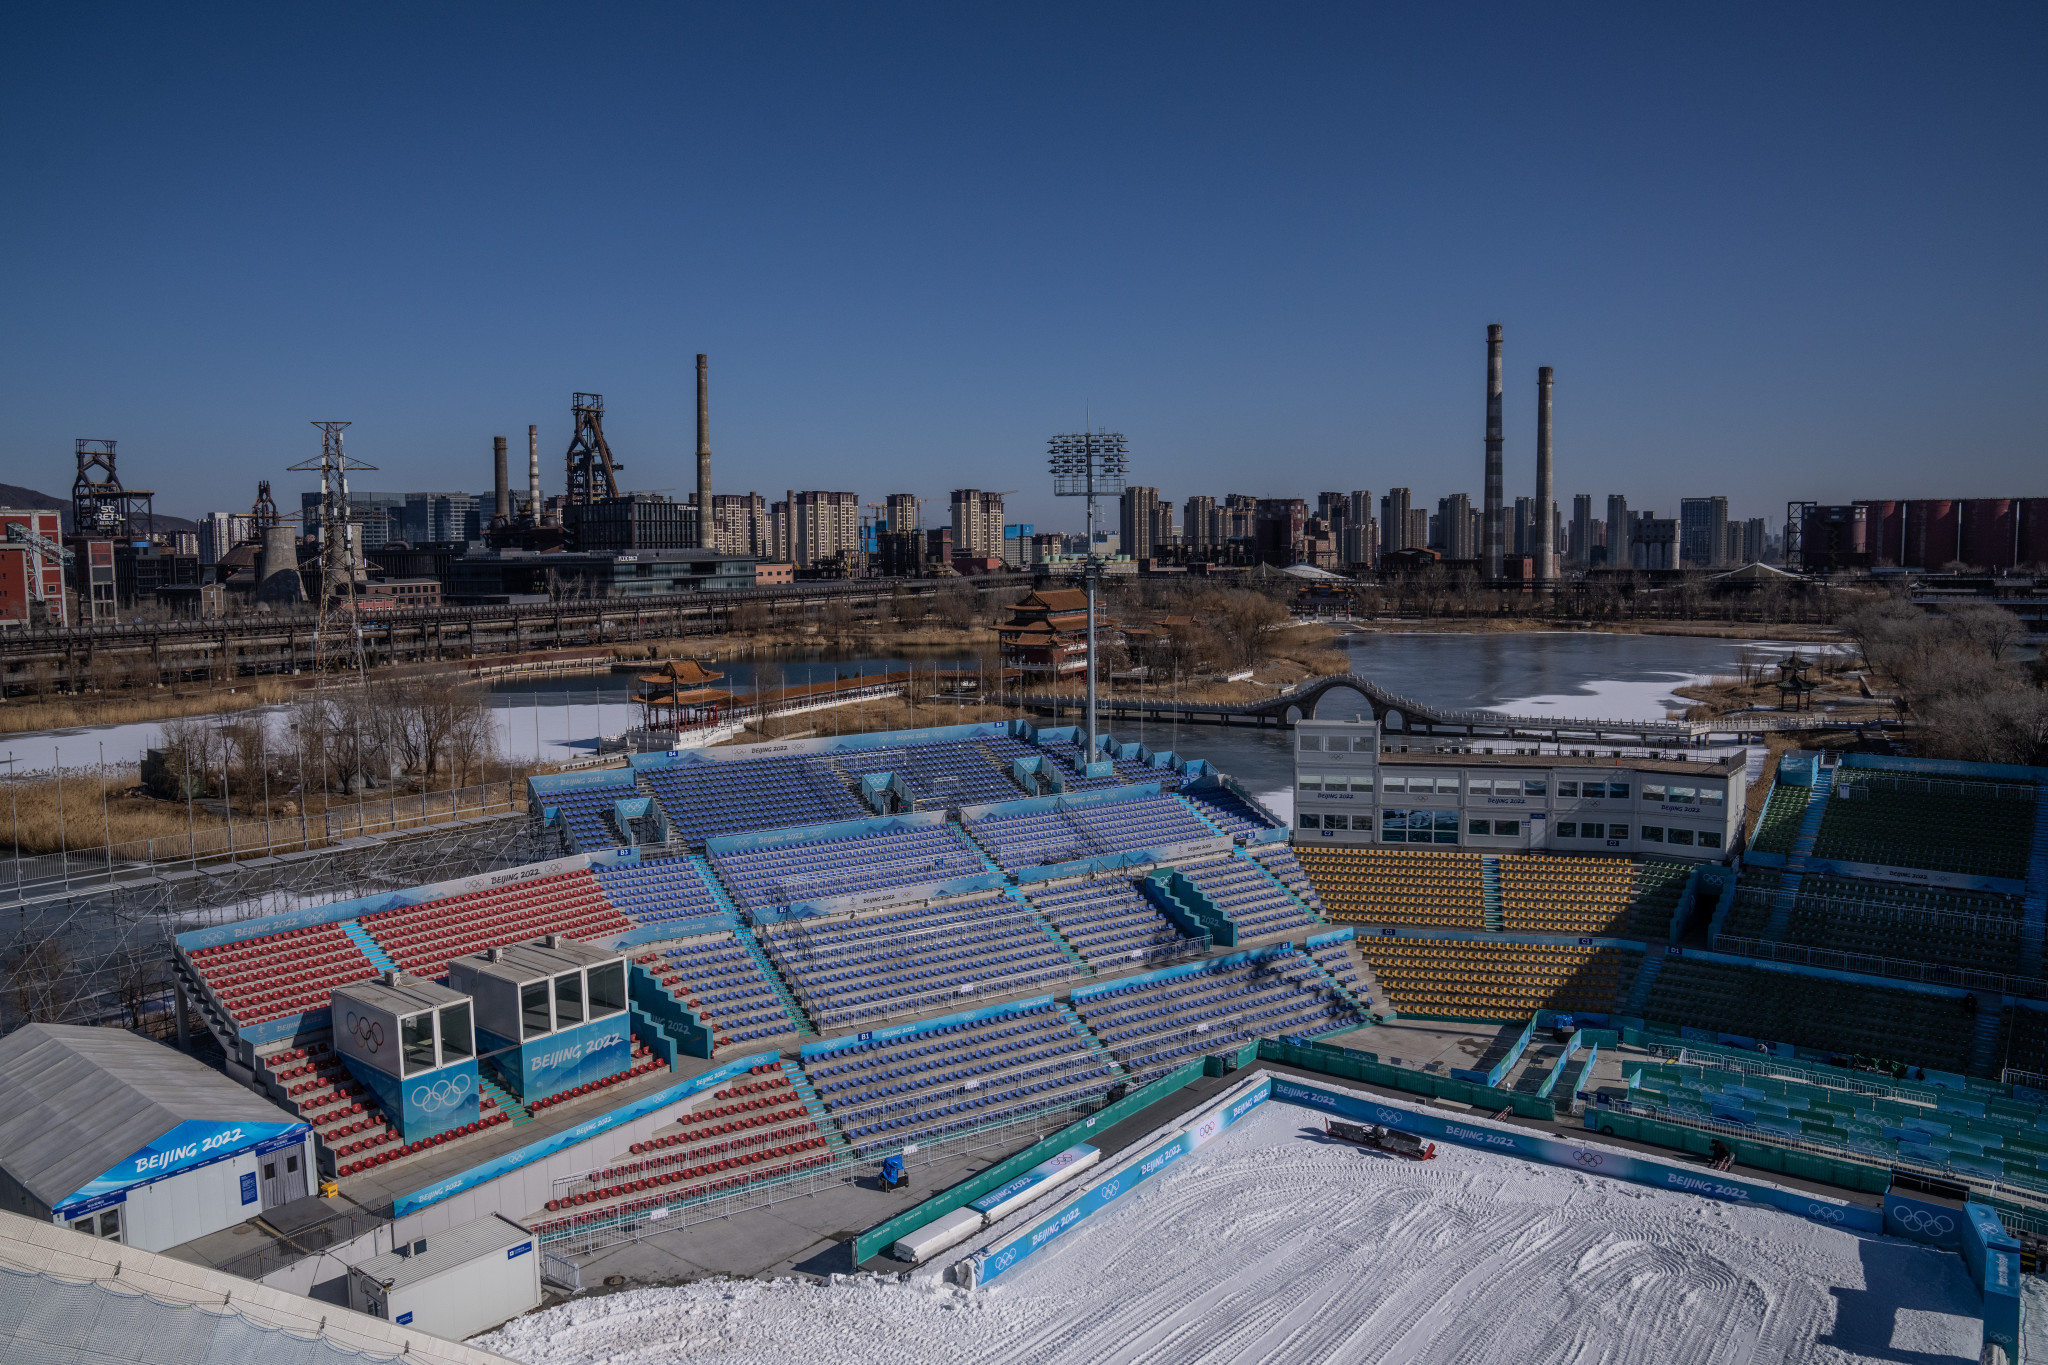 Beijing 2022 expects 150,000 spectators from outside closed loop to attend Winter Olympic events